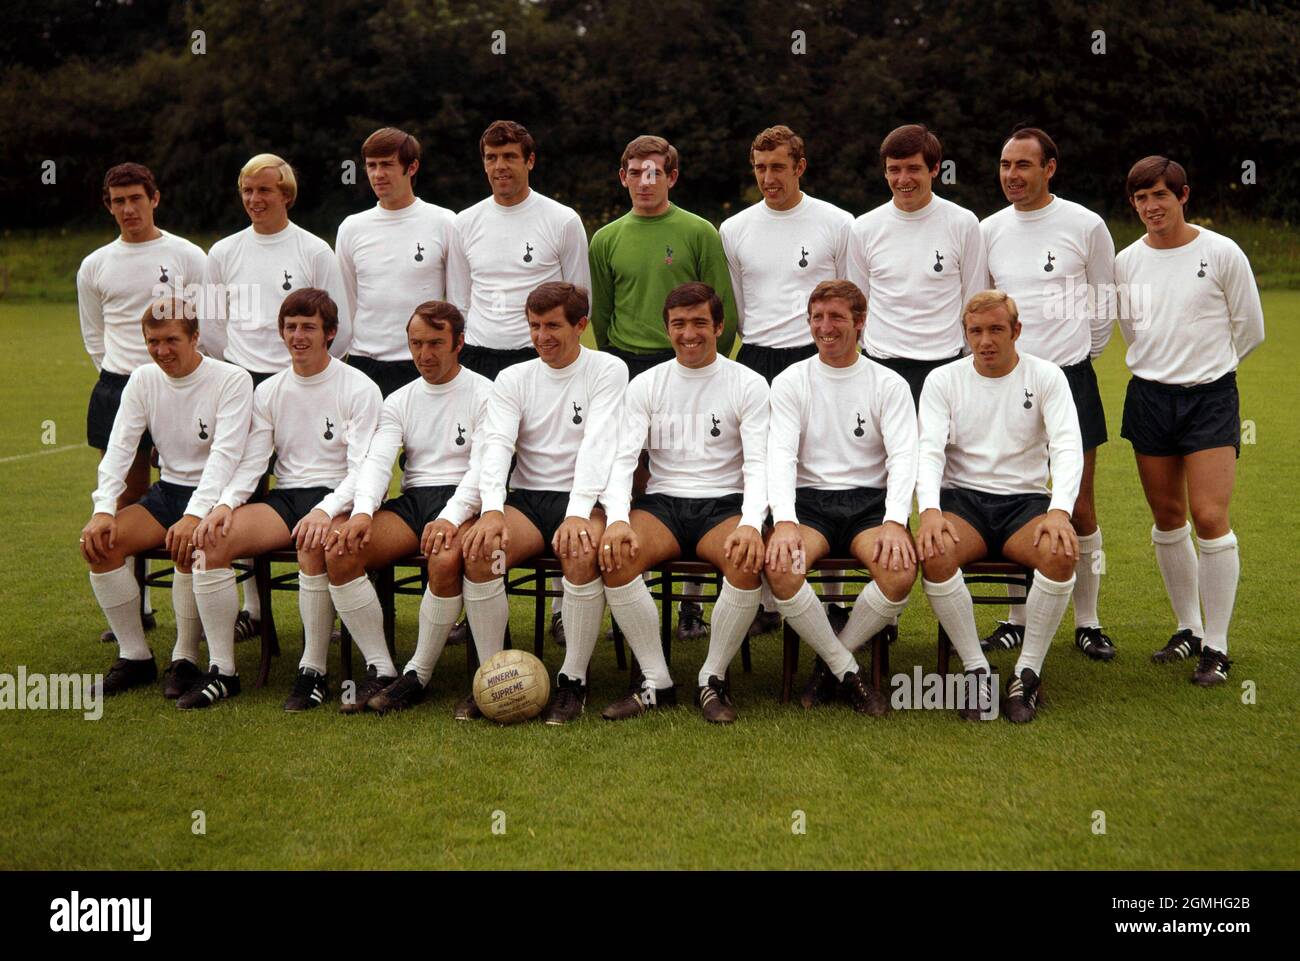 File photo dated 29-07-1968 of Tottenham Hotspur F.C. Back Row: James Pearce, Philip Beal, John Collins, Mike England, Patrick Jennings, Martin Chivers, Cyril Knowles, Alan Gilzean and Joesph Kinnear. Front Row: Dennis Bond, James Roberston, Jimmy Greaves, Alan Mullery (Capt); Terence Venables, Clifford Jones and Anthony Want. Issue date: Sunday September 19, 2021. Stock Photo